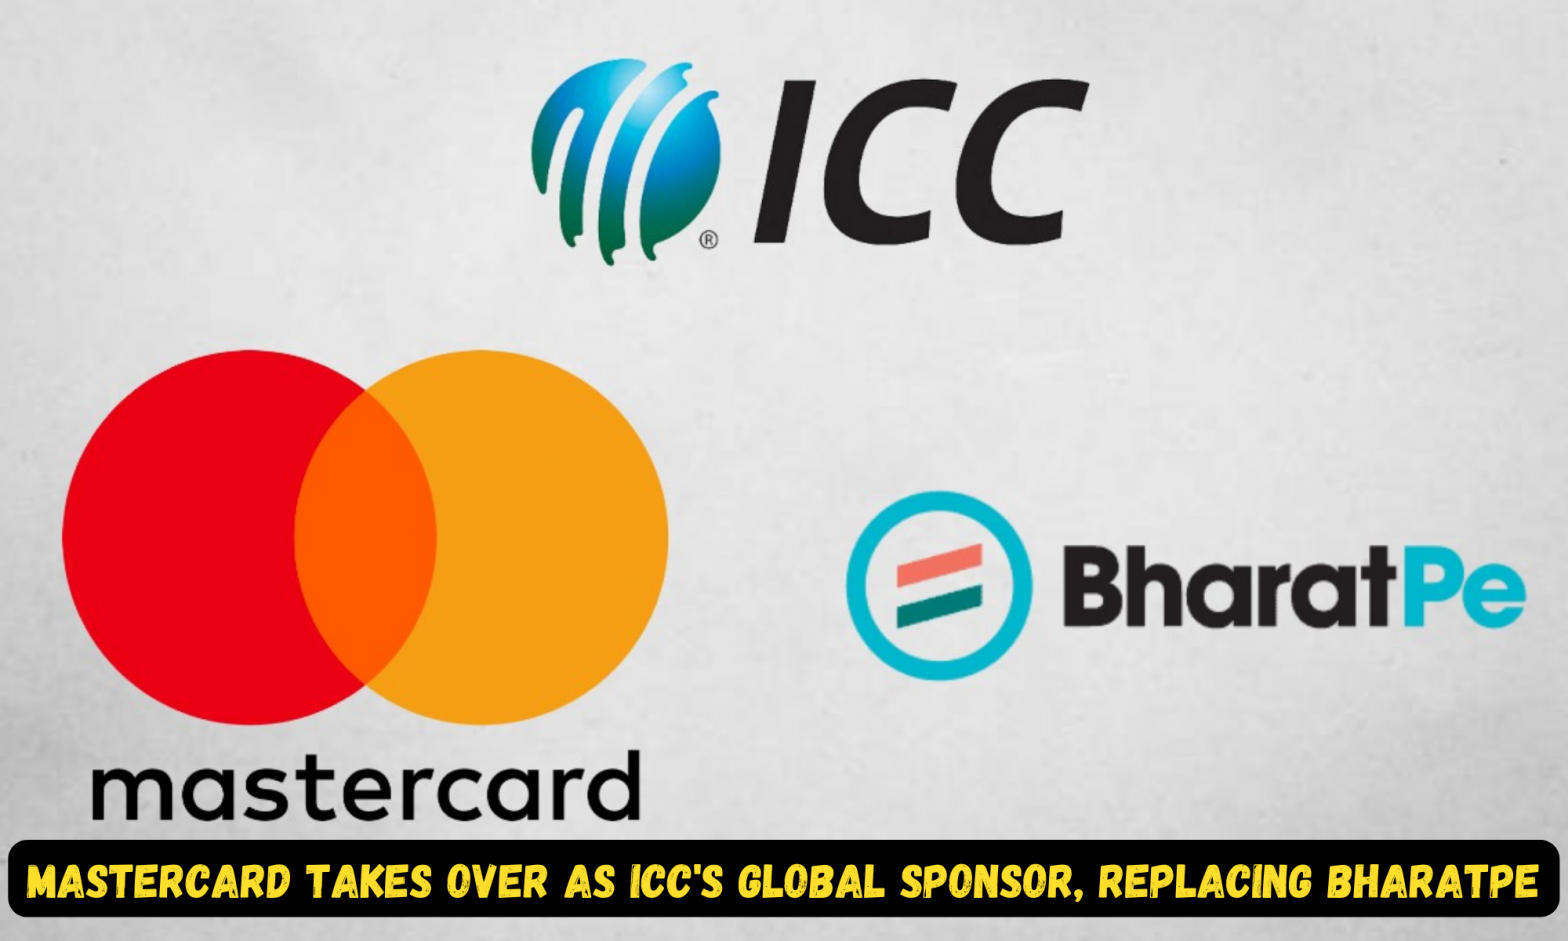 Mastercard Takes Over as ICC's Global Sponsor, Replacing BharatPe